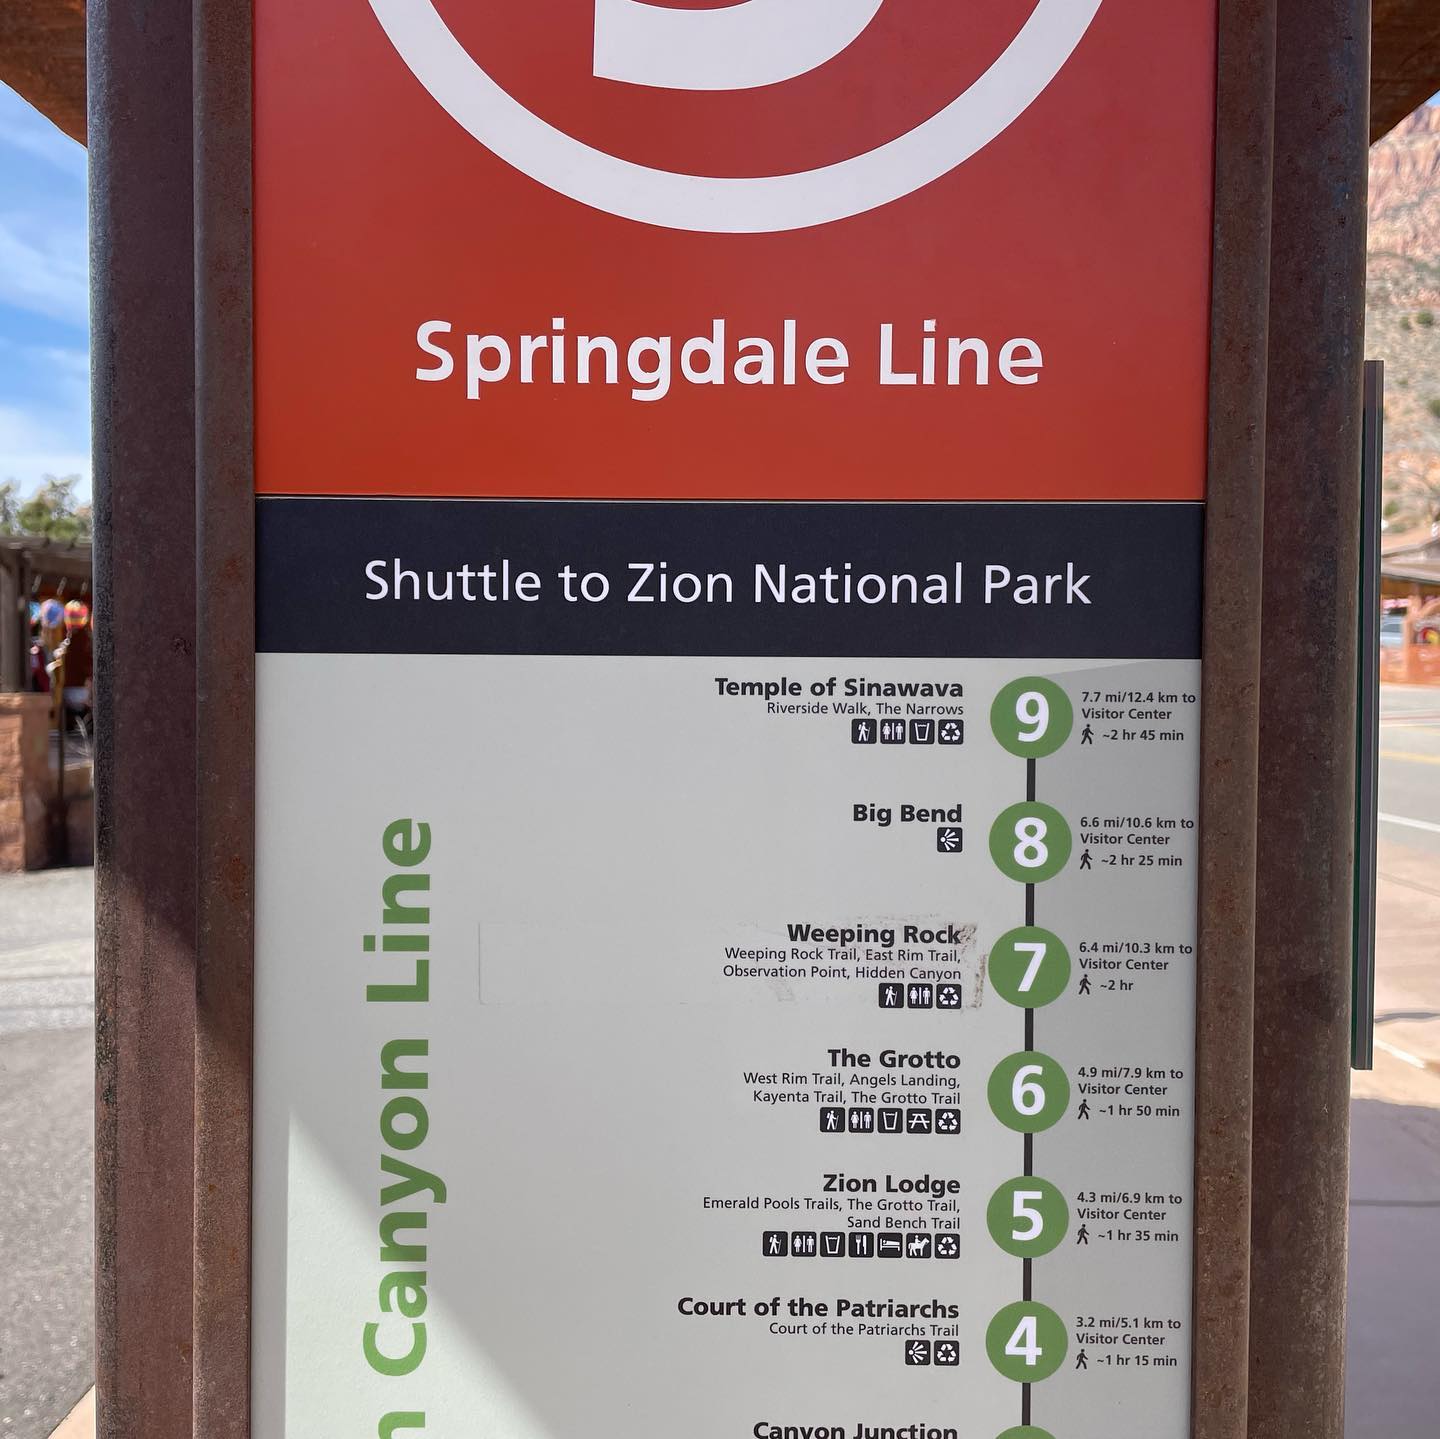 Getting around Zion and Springdale is just a shuttle ride away.  Pollution.  Congestion.  Experience.